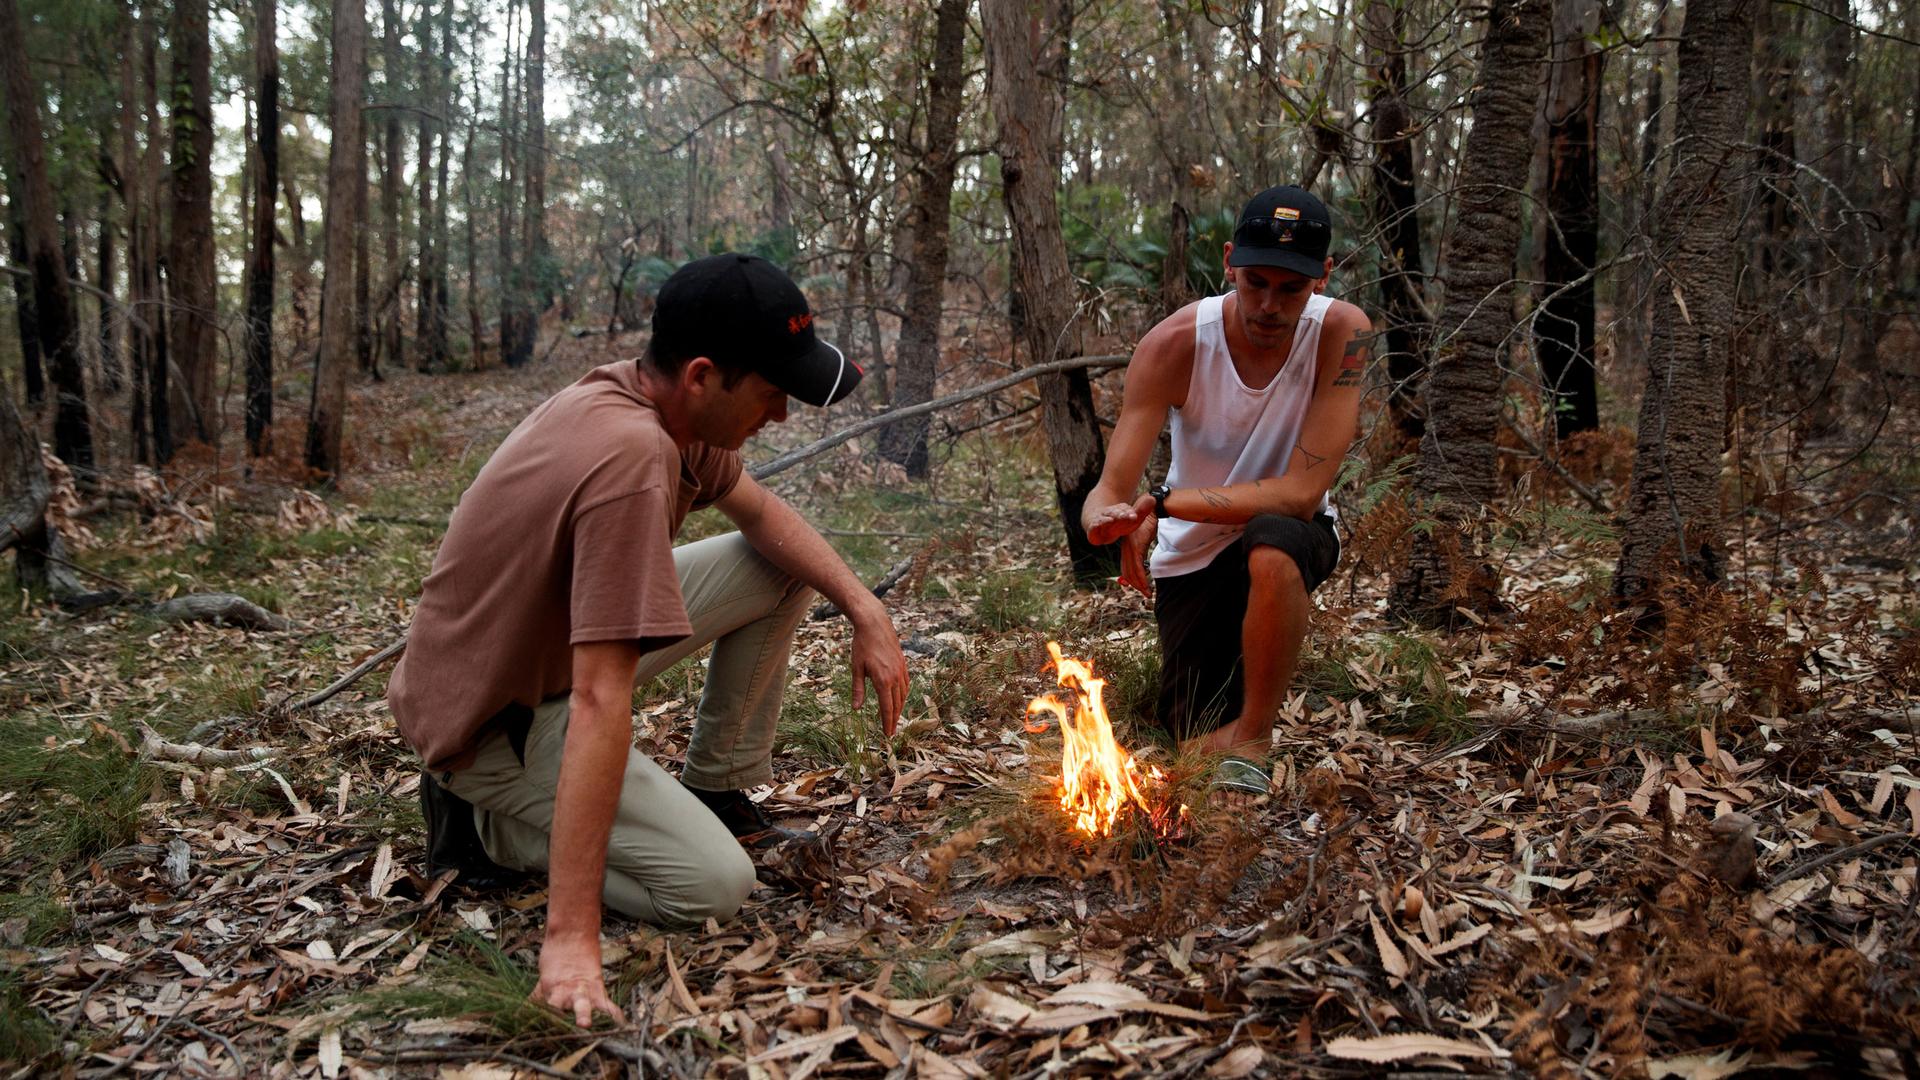 Two men bend over a small fire in the forest